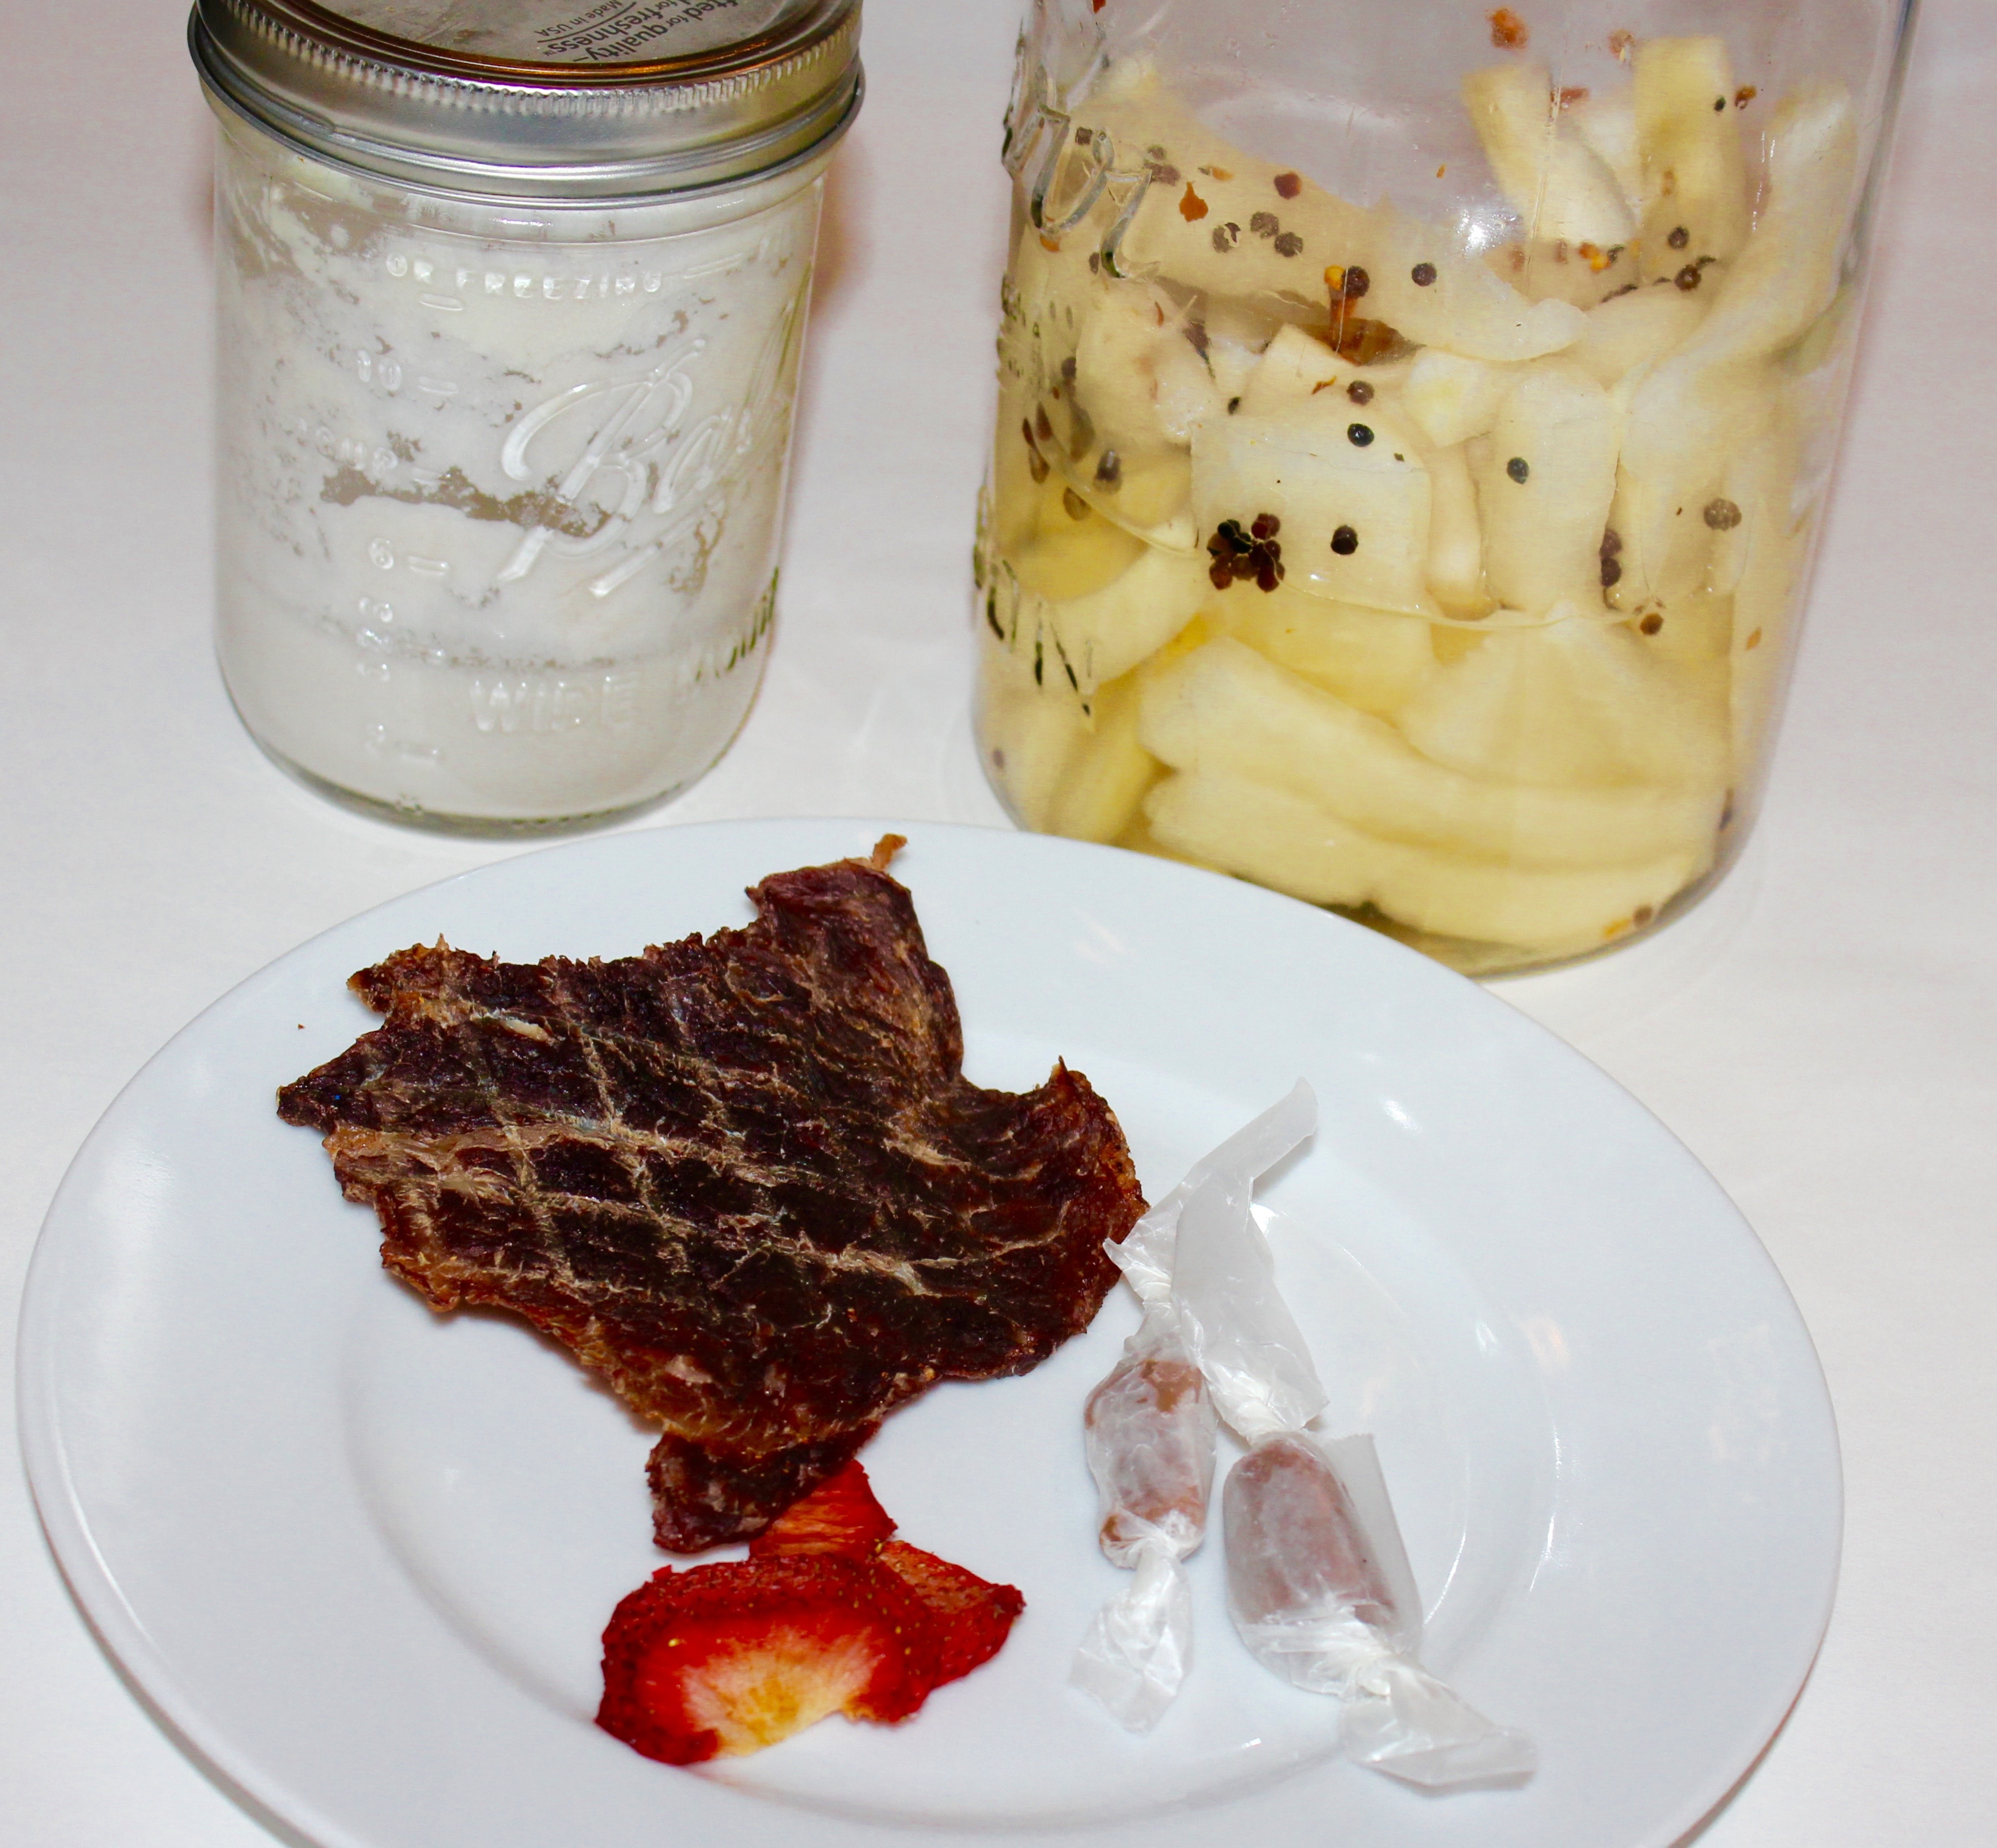 Because of moderate and severe food allergies and intolerances, I have resorted to making foods at home from scratch or in single-ingredient form. Picture from left to right: pure coconut milk, pickled daikon; plate, contains beef jerky, vegan salted lavender, caramels, dehydrated strawberry slices.